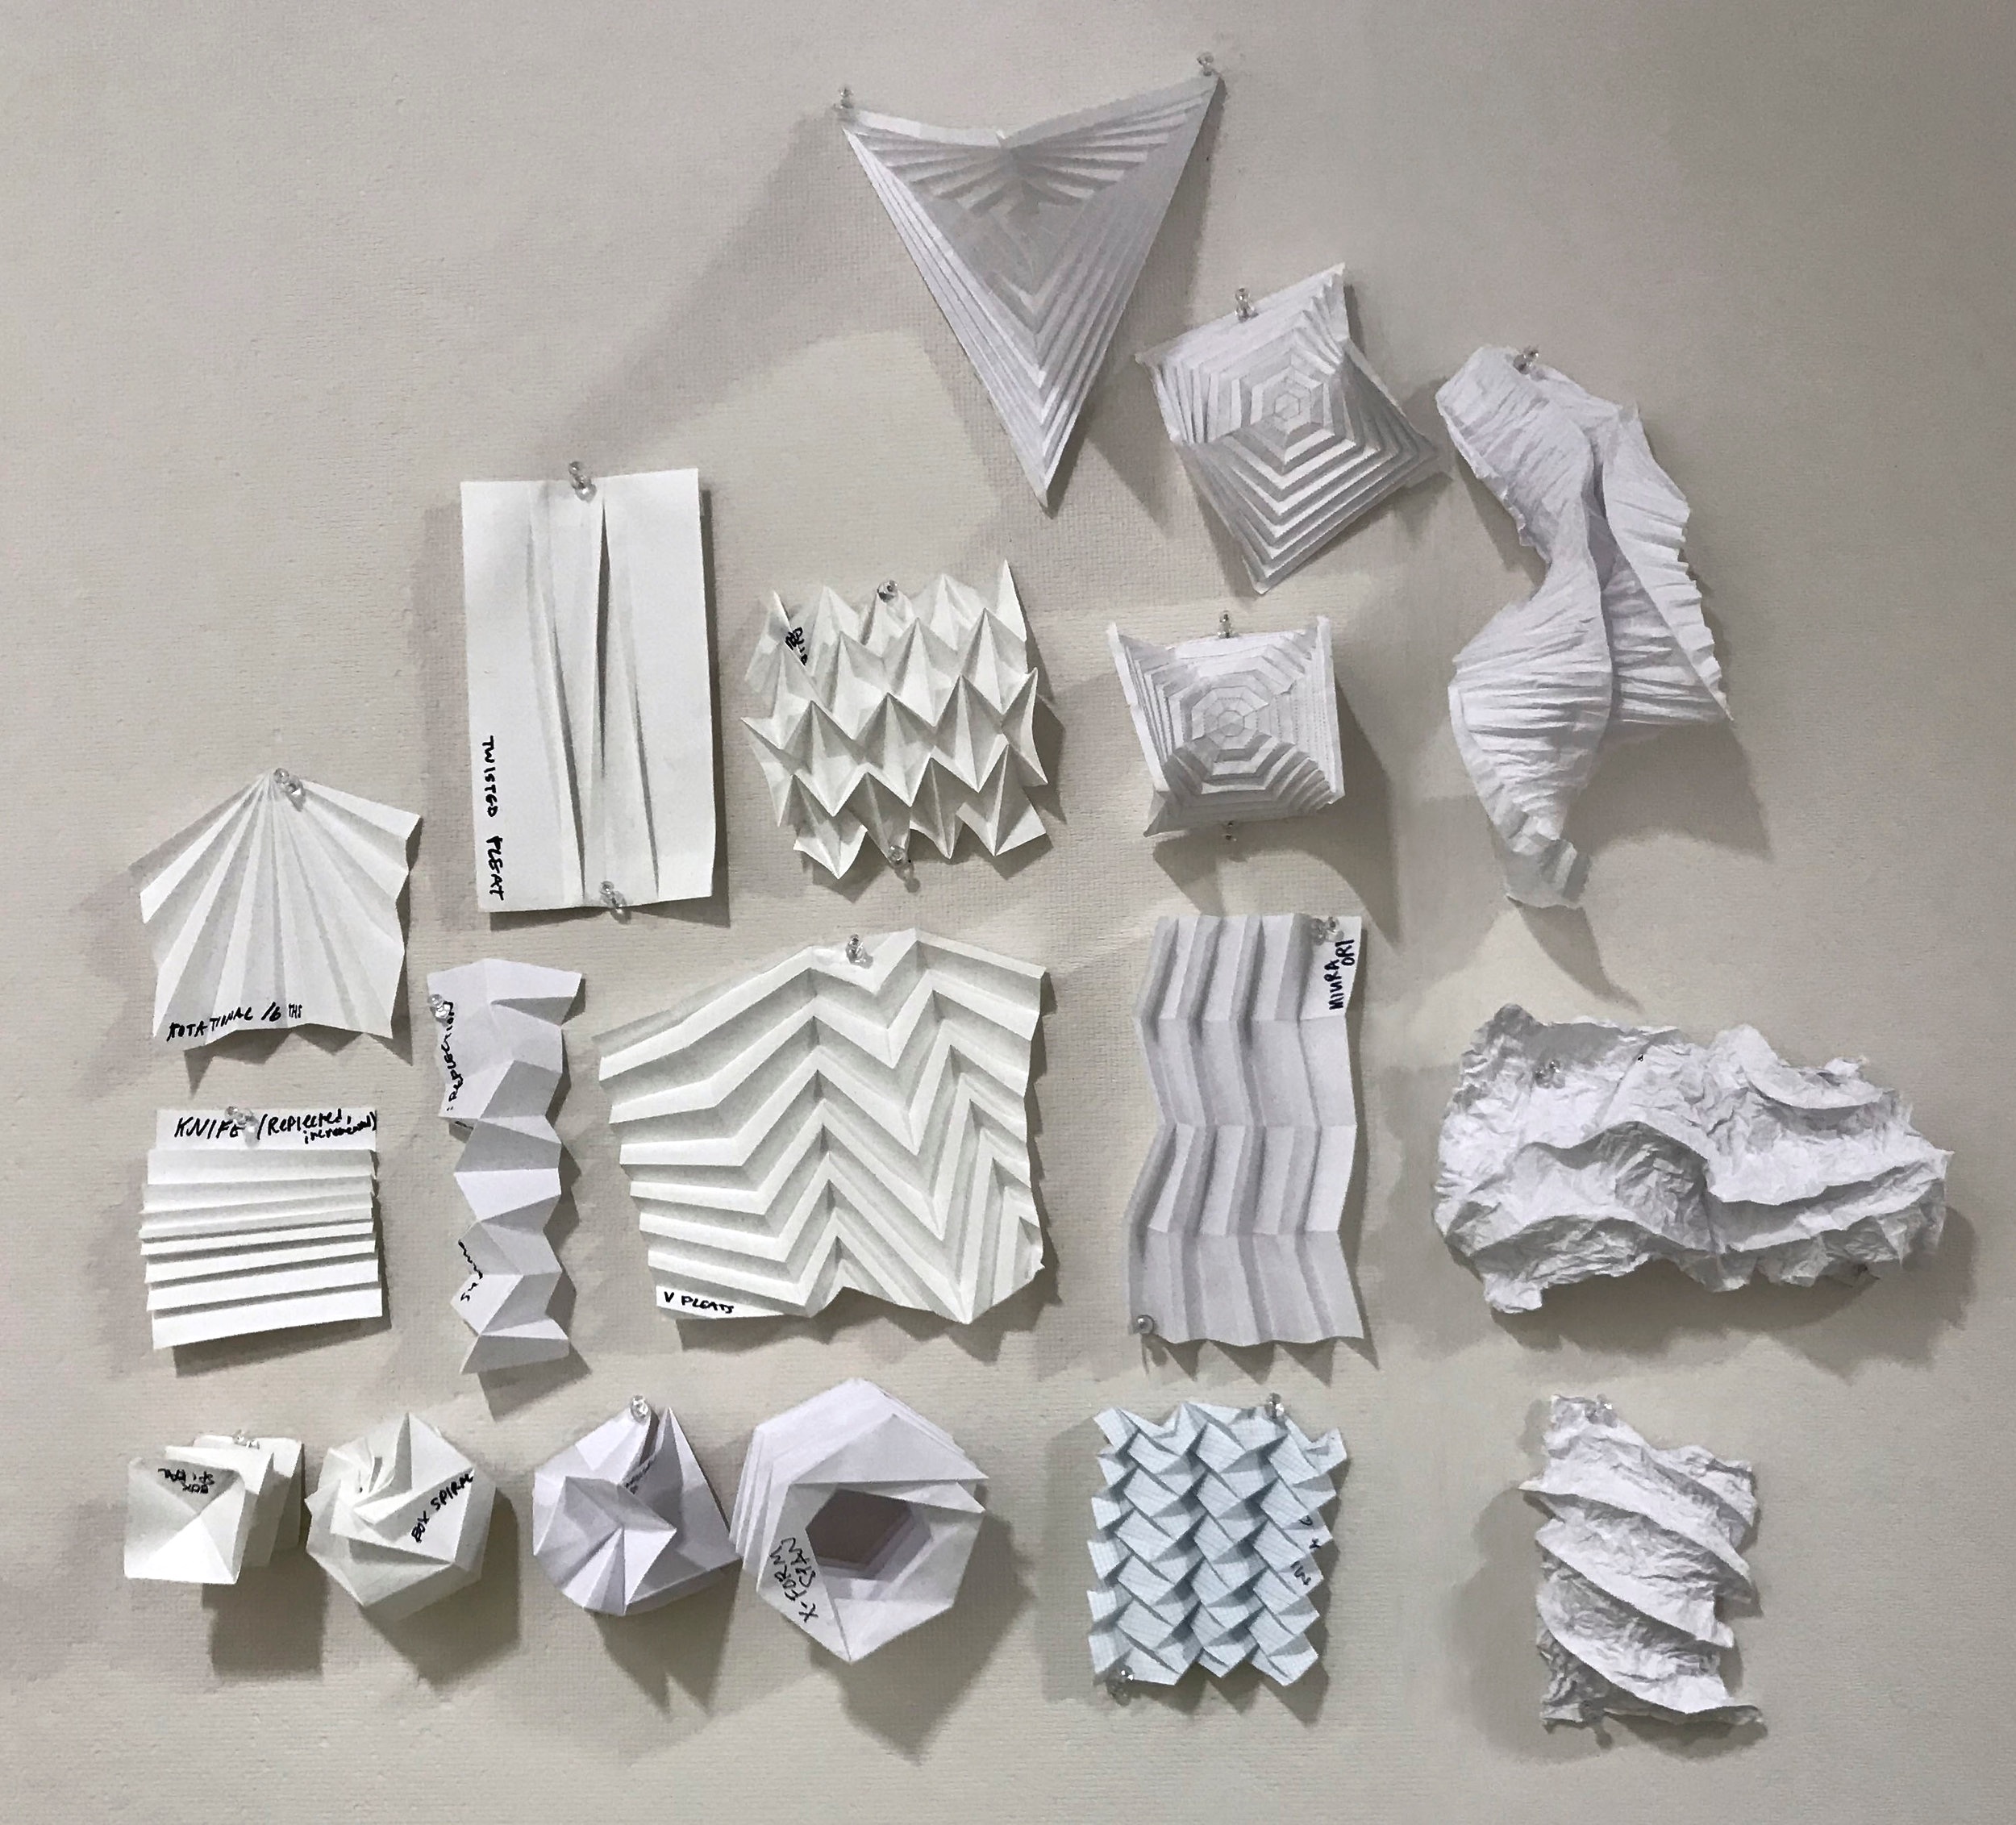  Tesselated paper tests based on Paul Jackson’s  Folding Techniques for Designers . 